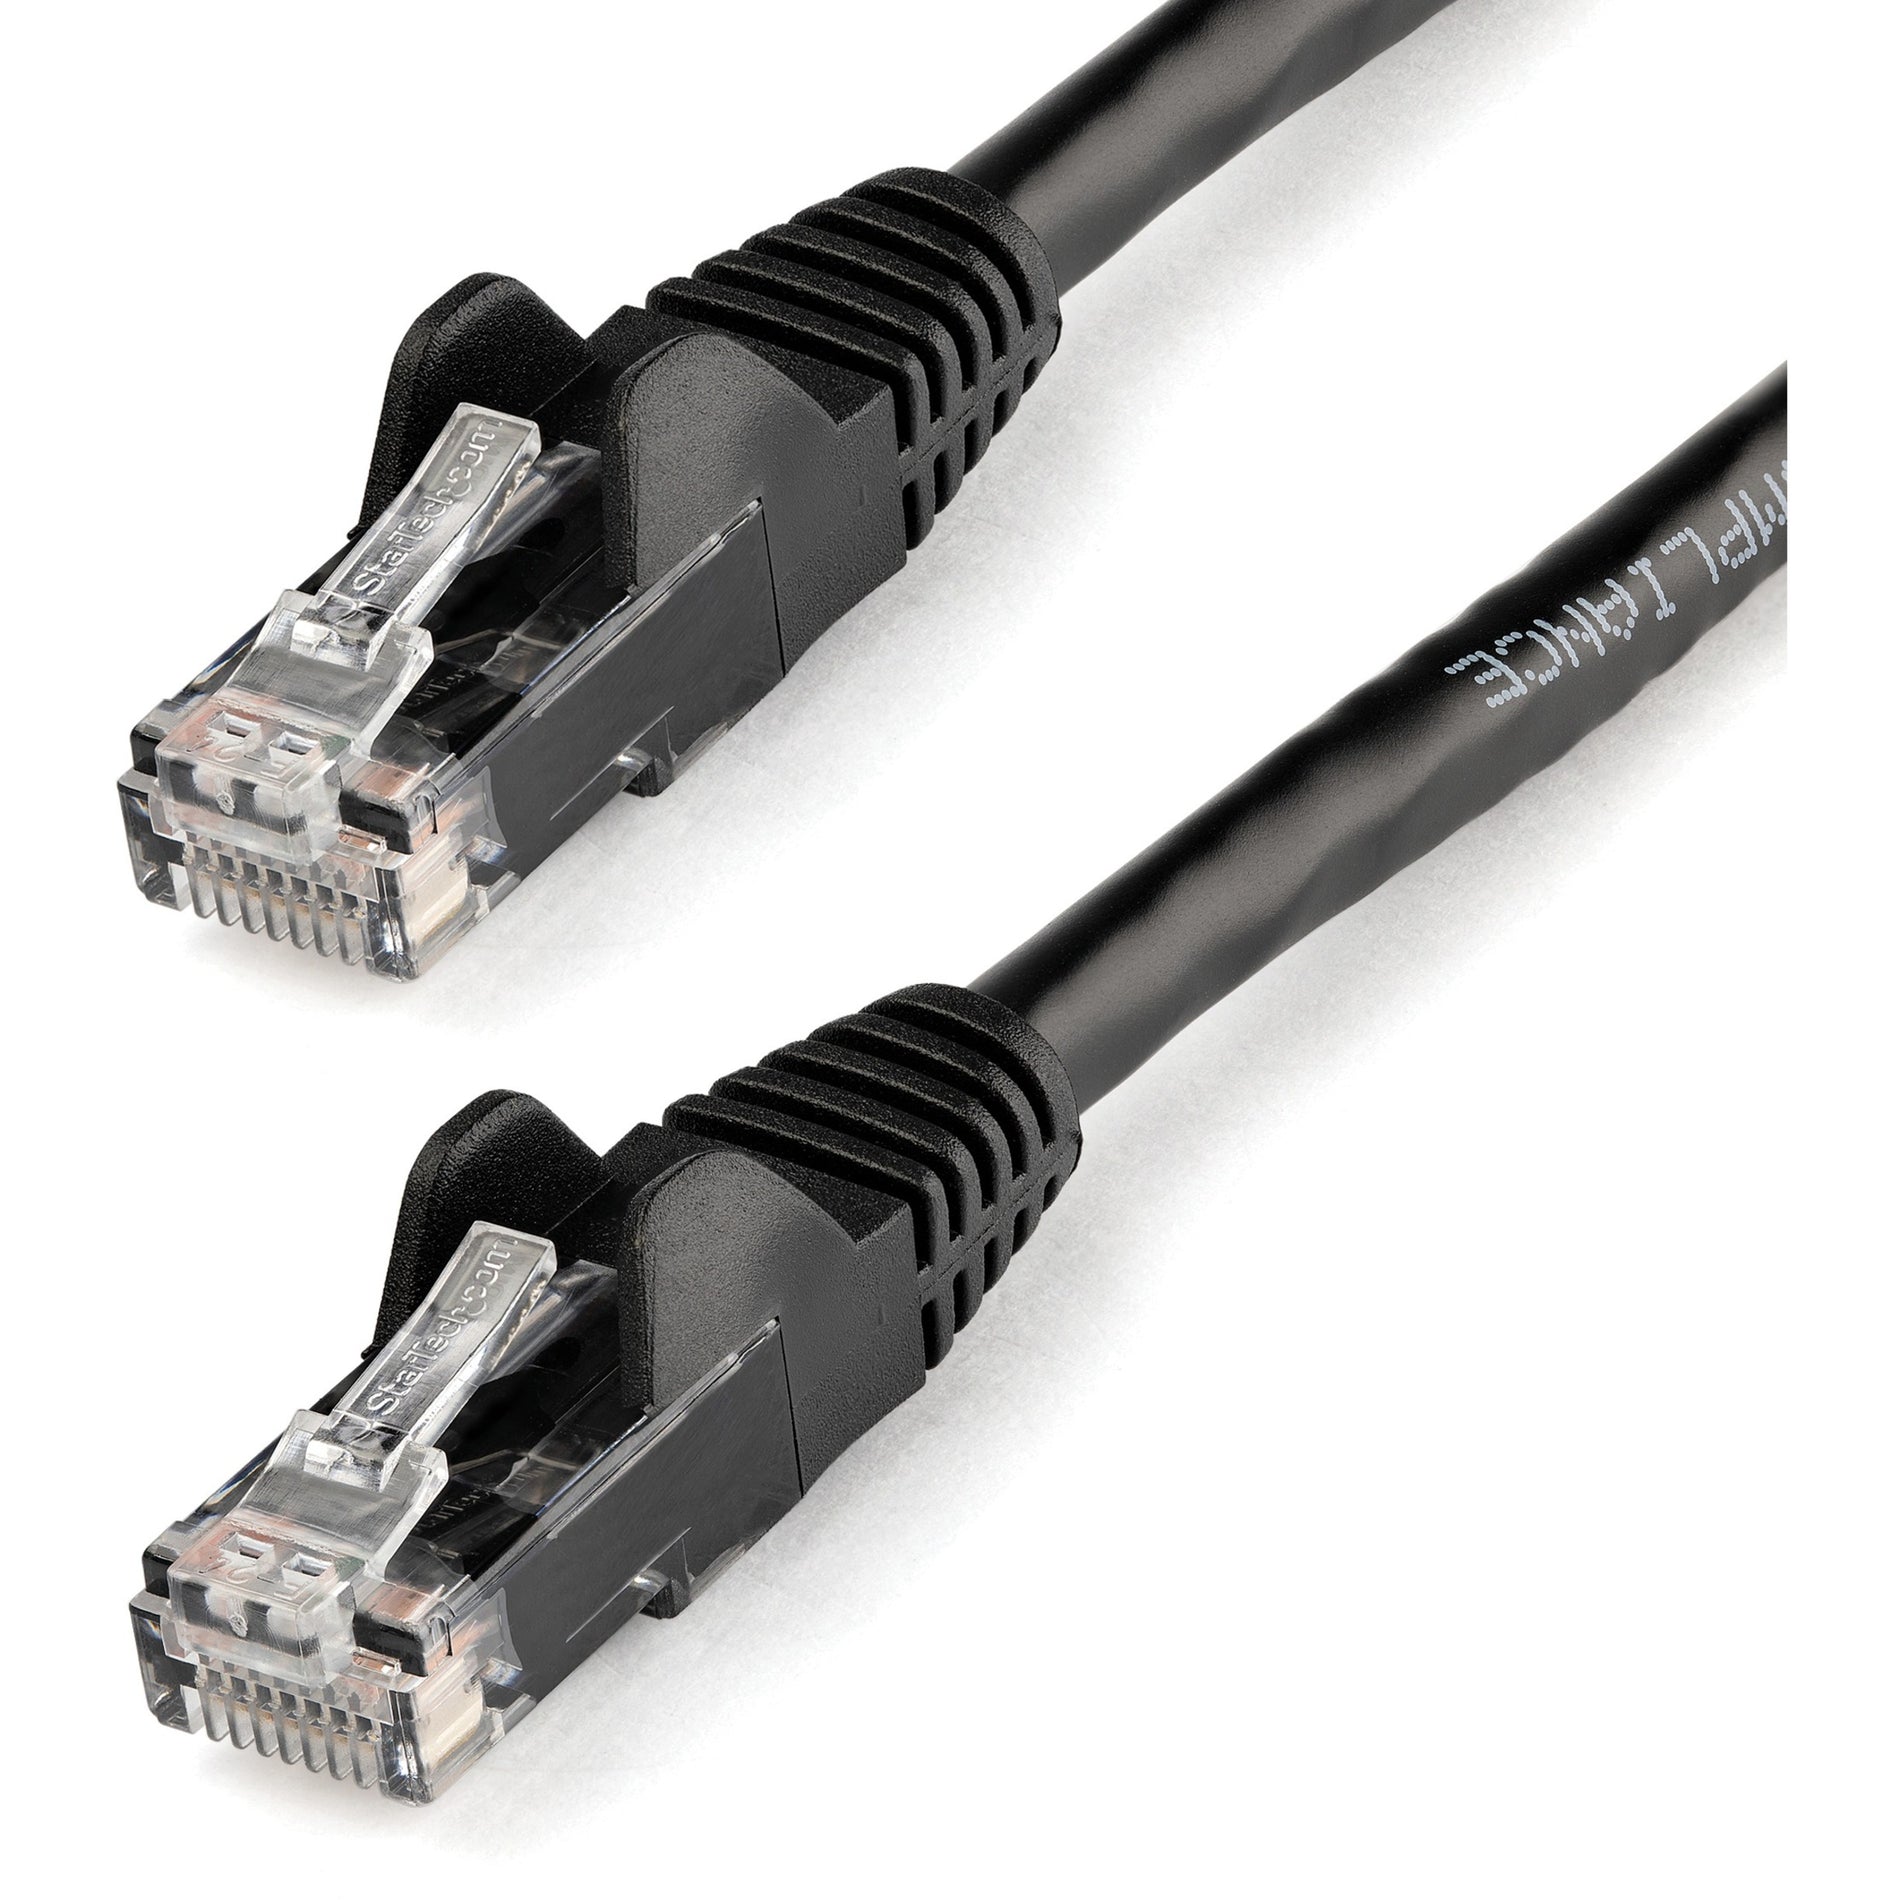 StarTech.com N6PATCH75BK 75 ft Black Snagless Cat6 UTP Patch Cable, Lifetime Warranty, Gold Connectors, Easy Cable Routing